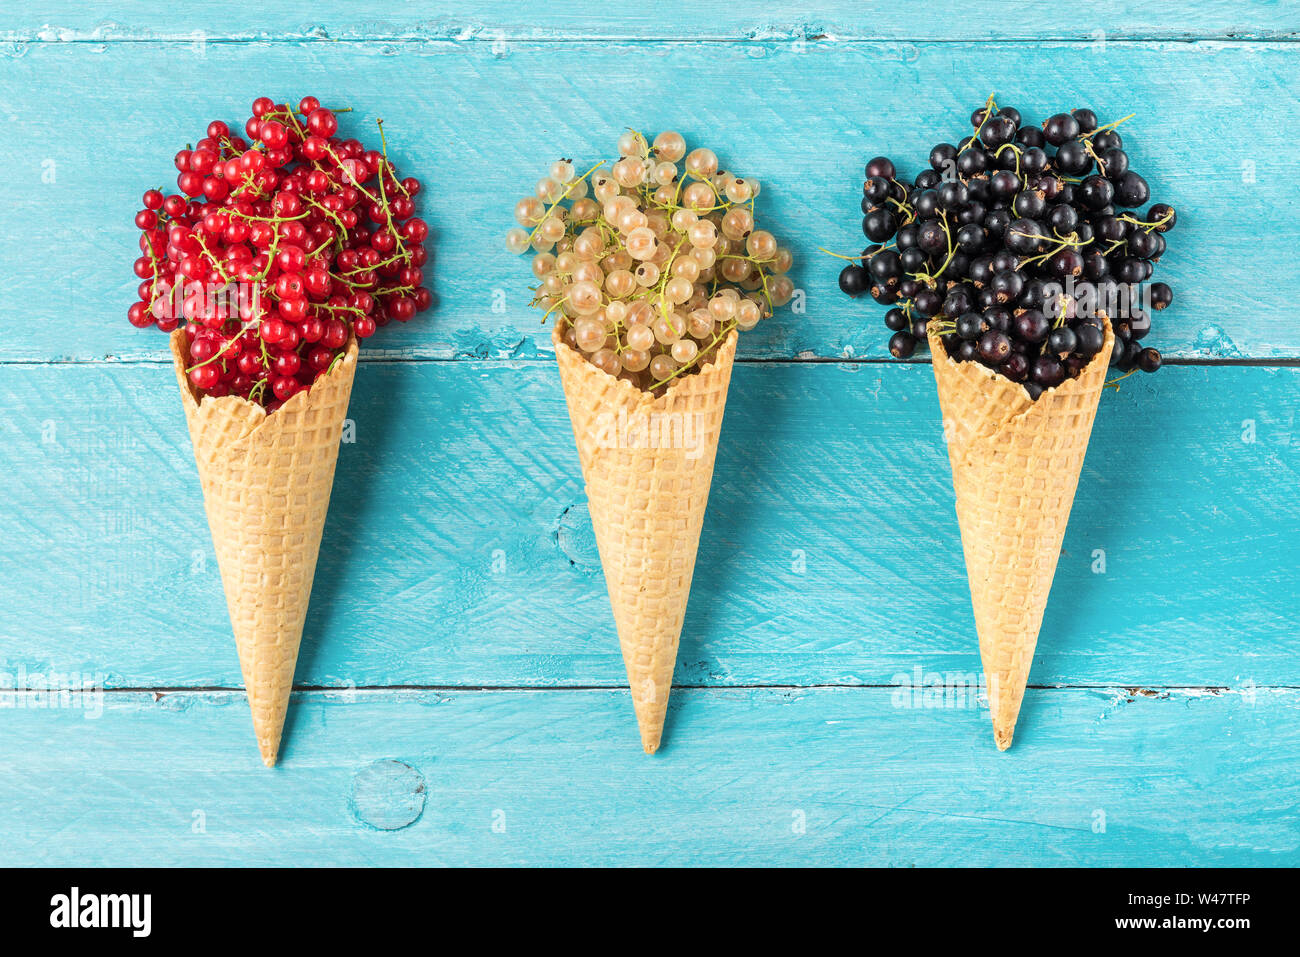 assortment of currant berries black, red and white in waffle ice cream cone on blue wooden background. creative summer food concept. flat lay. top vie Stock Photo